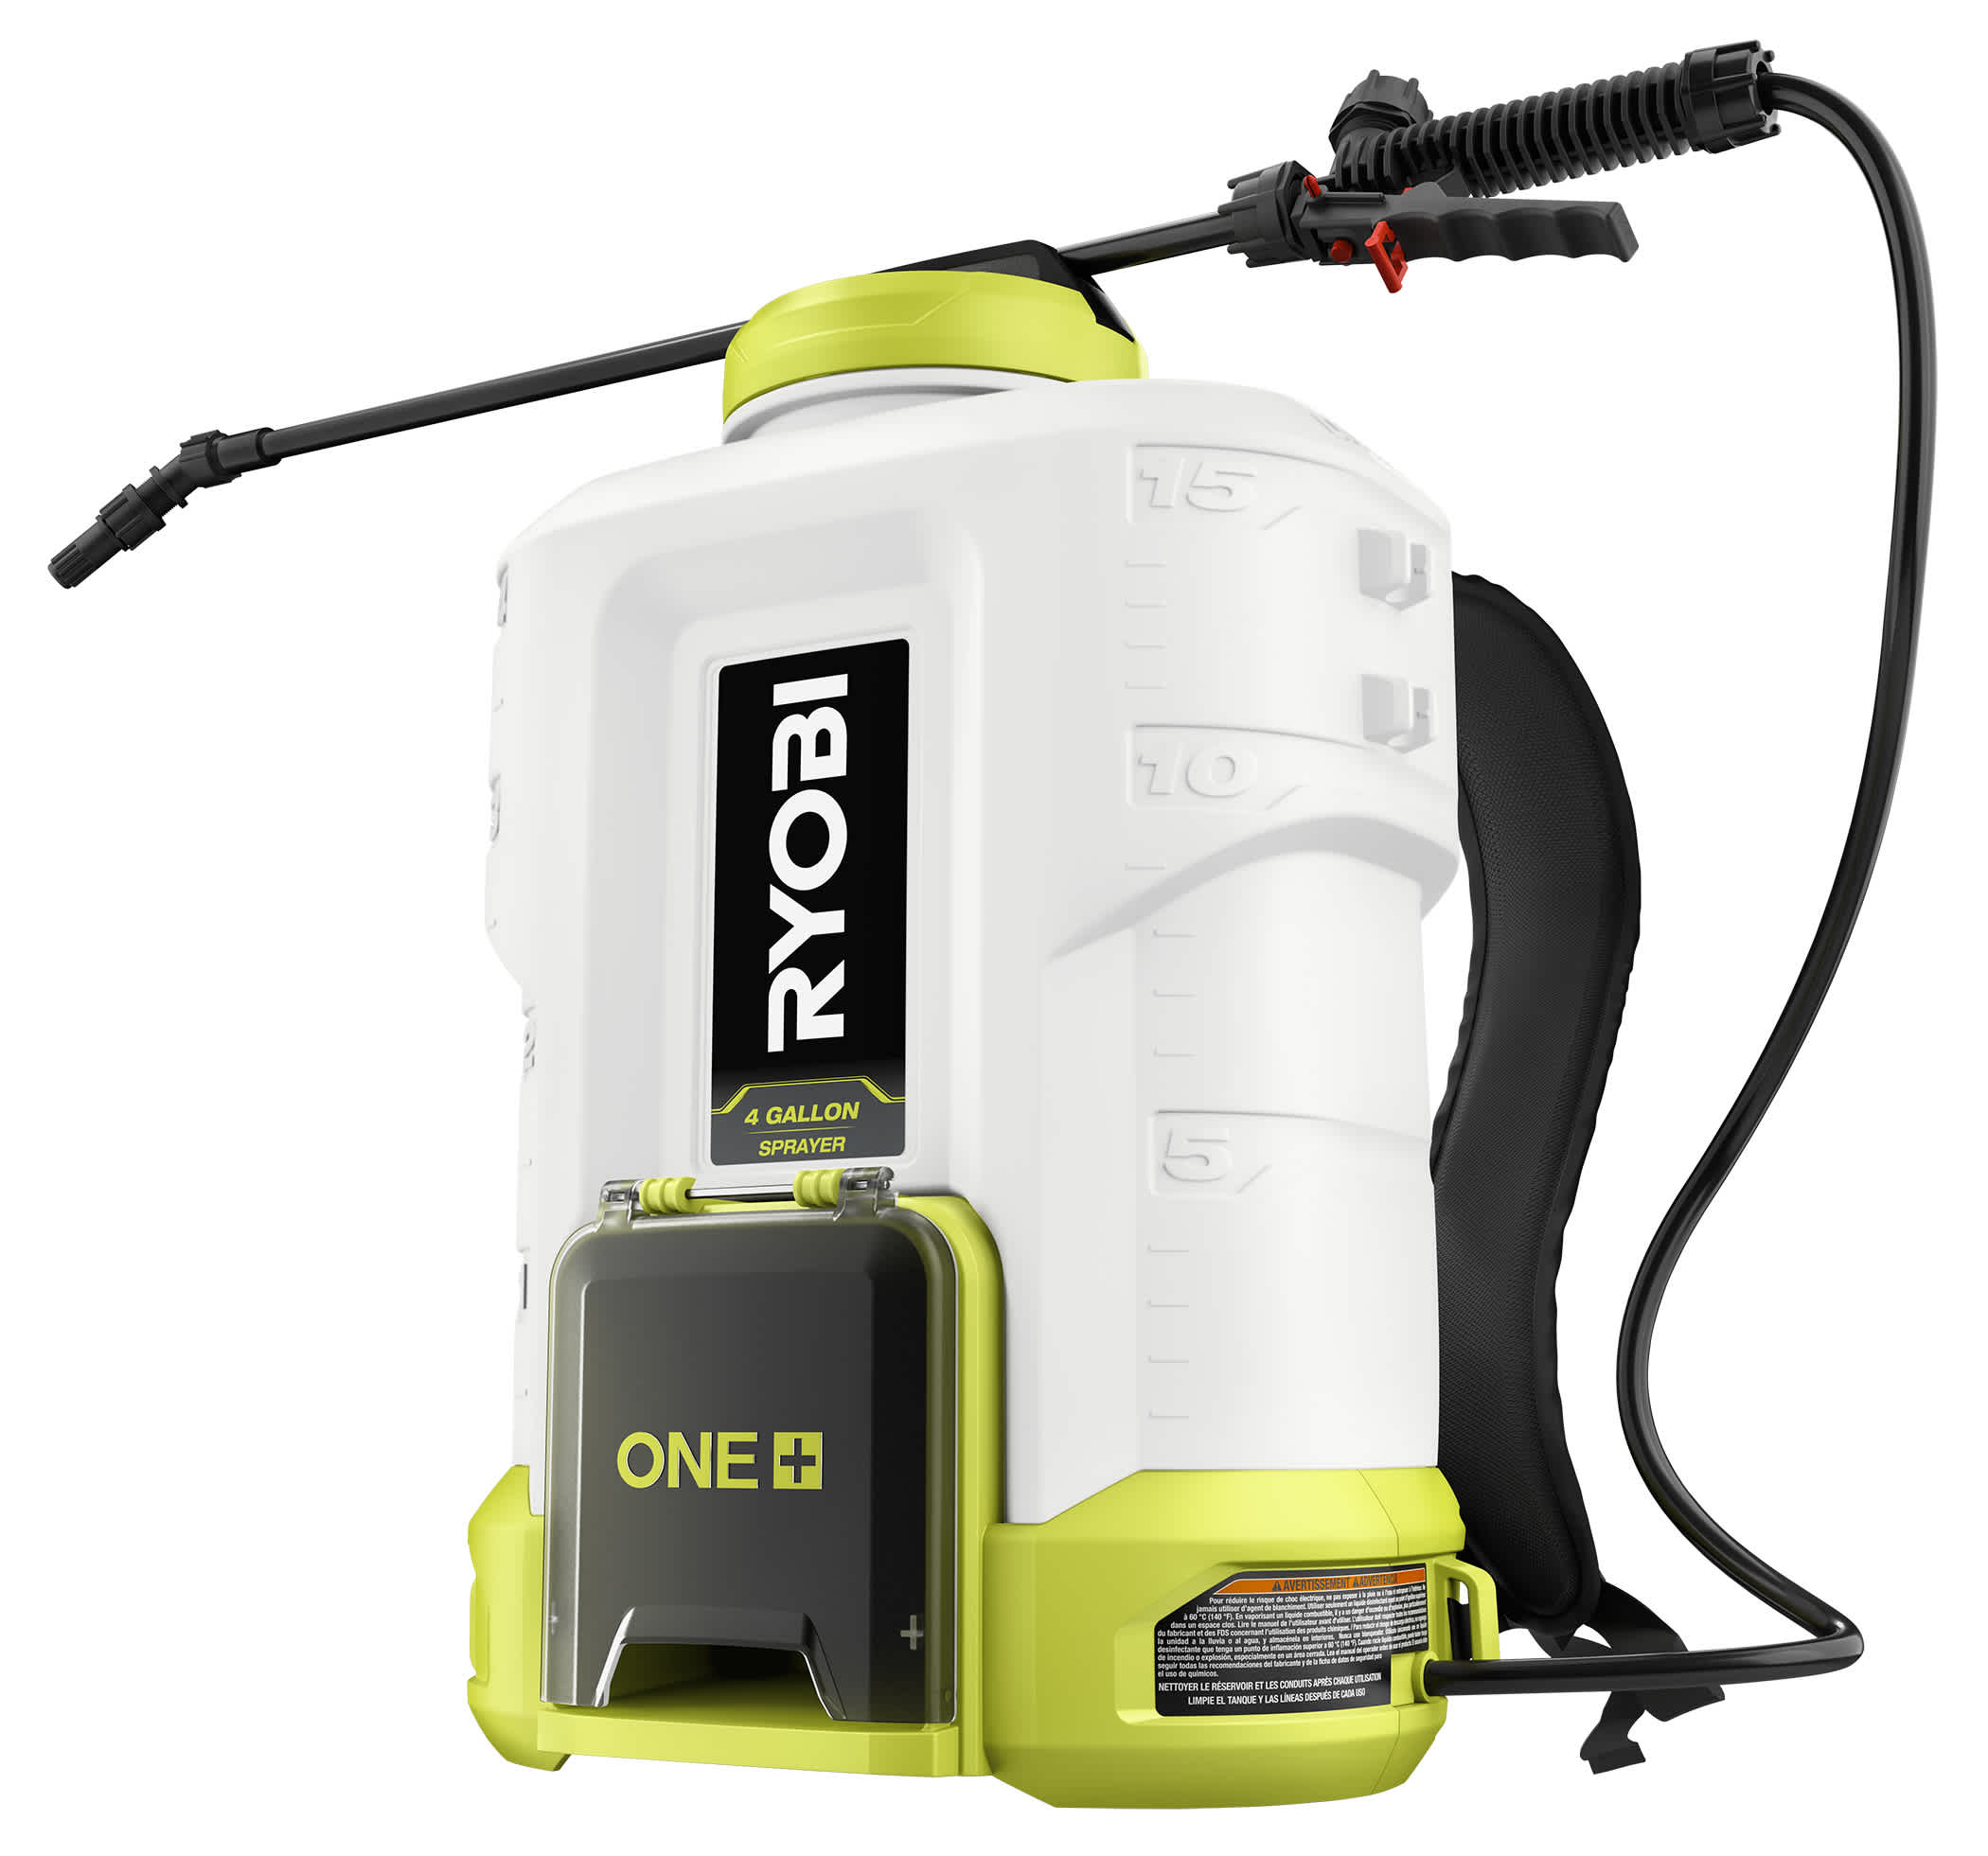 18V ONE+ SUBMERSIBLE WATER TRANSFER PUMP - TOOL ONLY